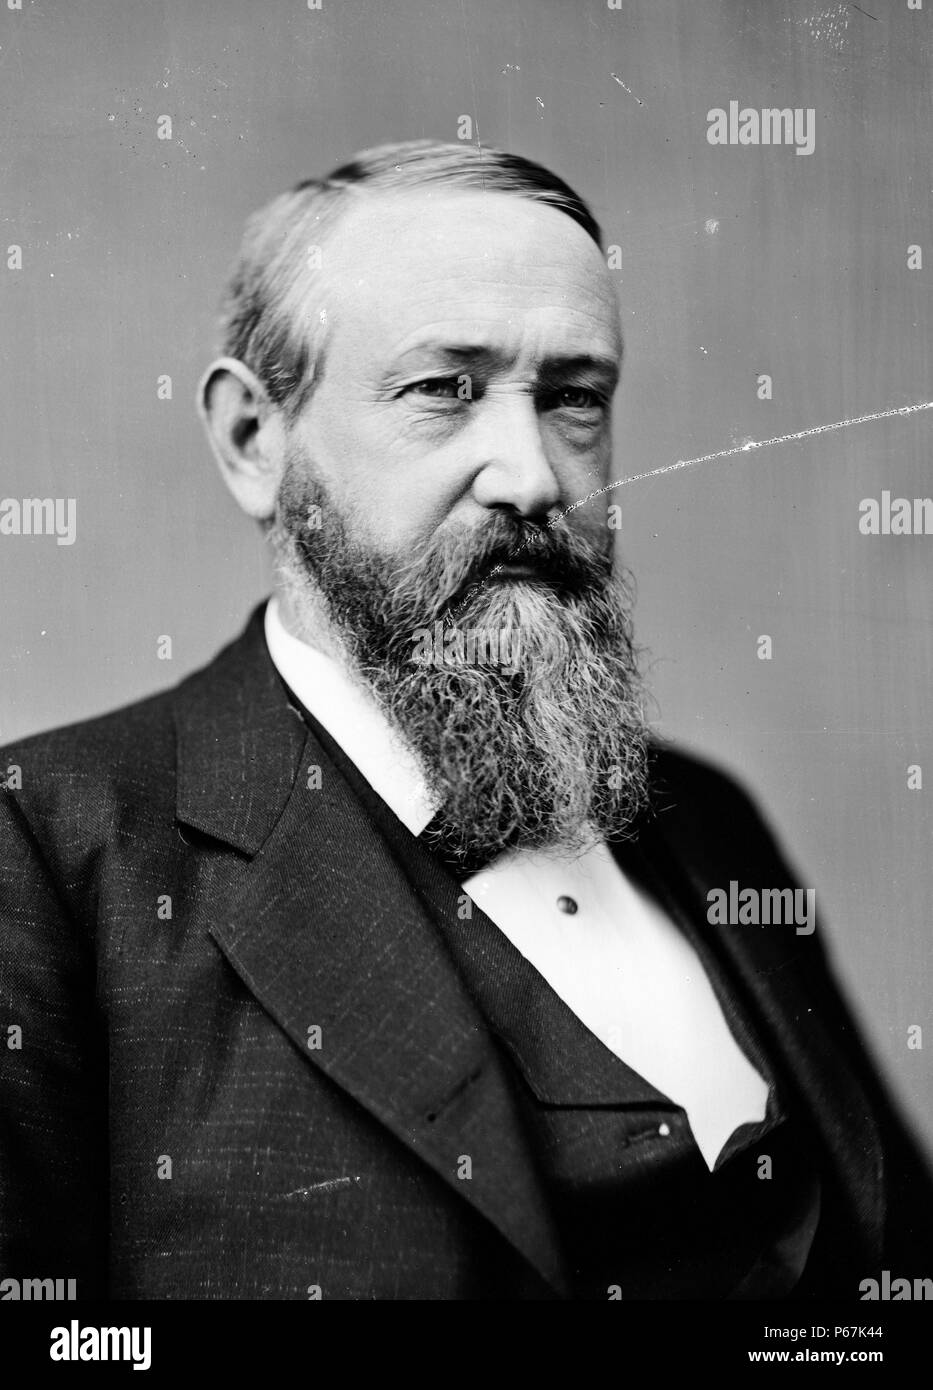 President Benjamin Harrison. Harrison was the 23rd President of the United States. He became a prominent local attorney, Presbyterian church leader and politician in Indiana before his election. Stock Photo